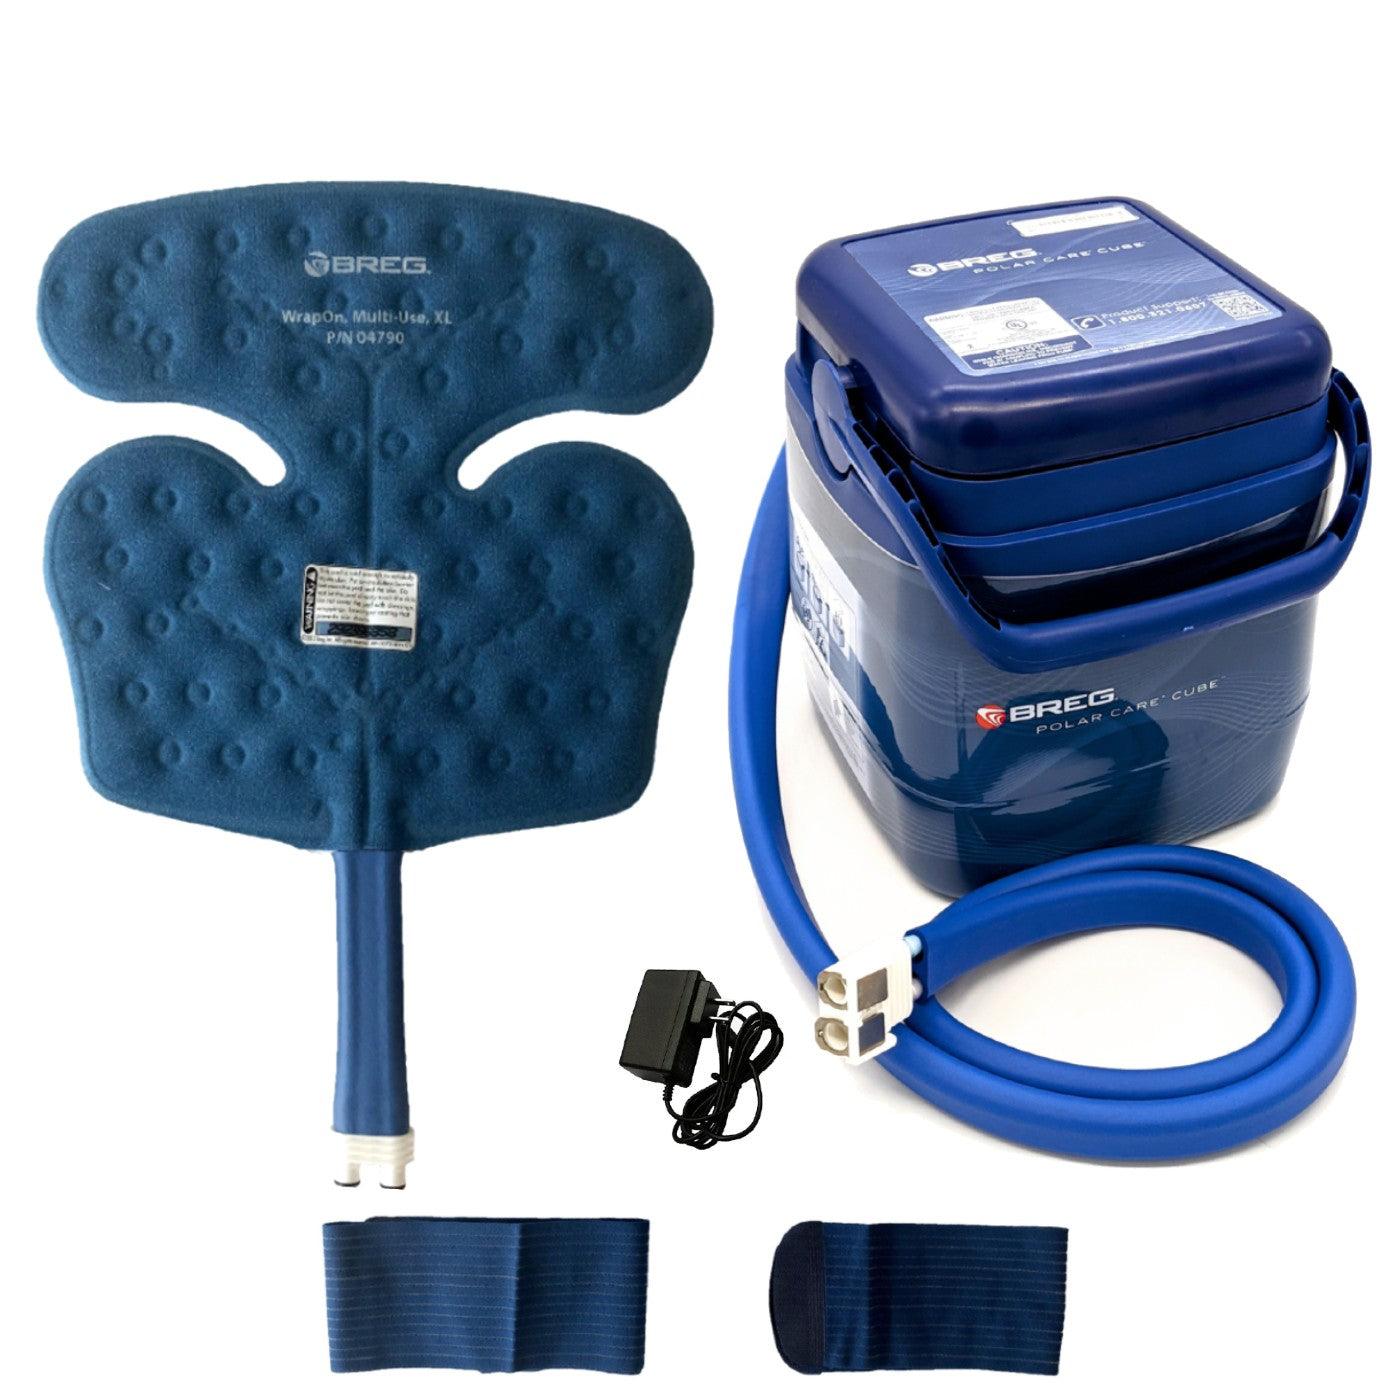 Breg® Polar Care Cube System w/ Wrap-On Pads - 10701-04790 Breg® Polar Care Cube System w/ Wrap-On Pads - undefined by Supply Physical Therapy Breg, Cold Therapy Units, Combos, Cube